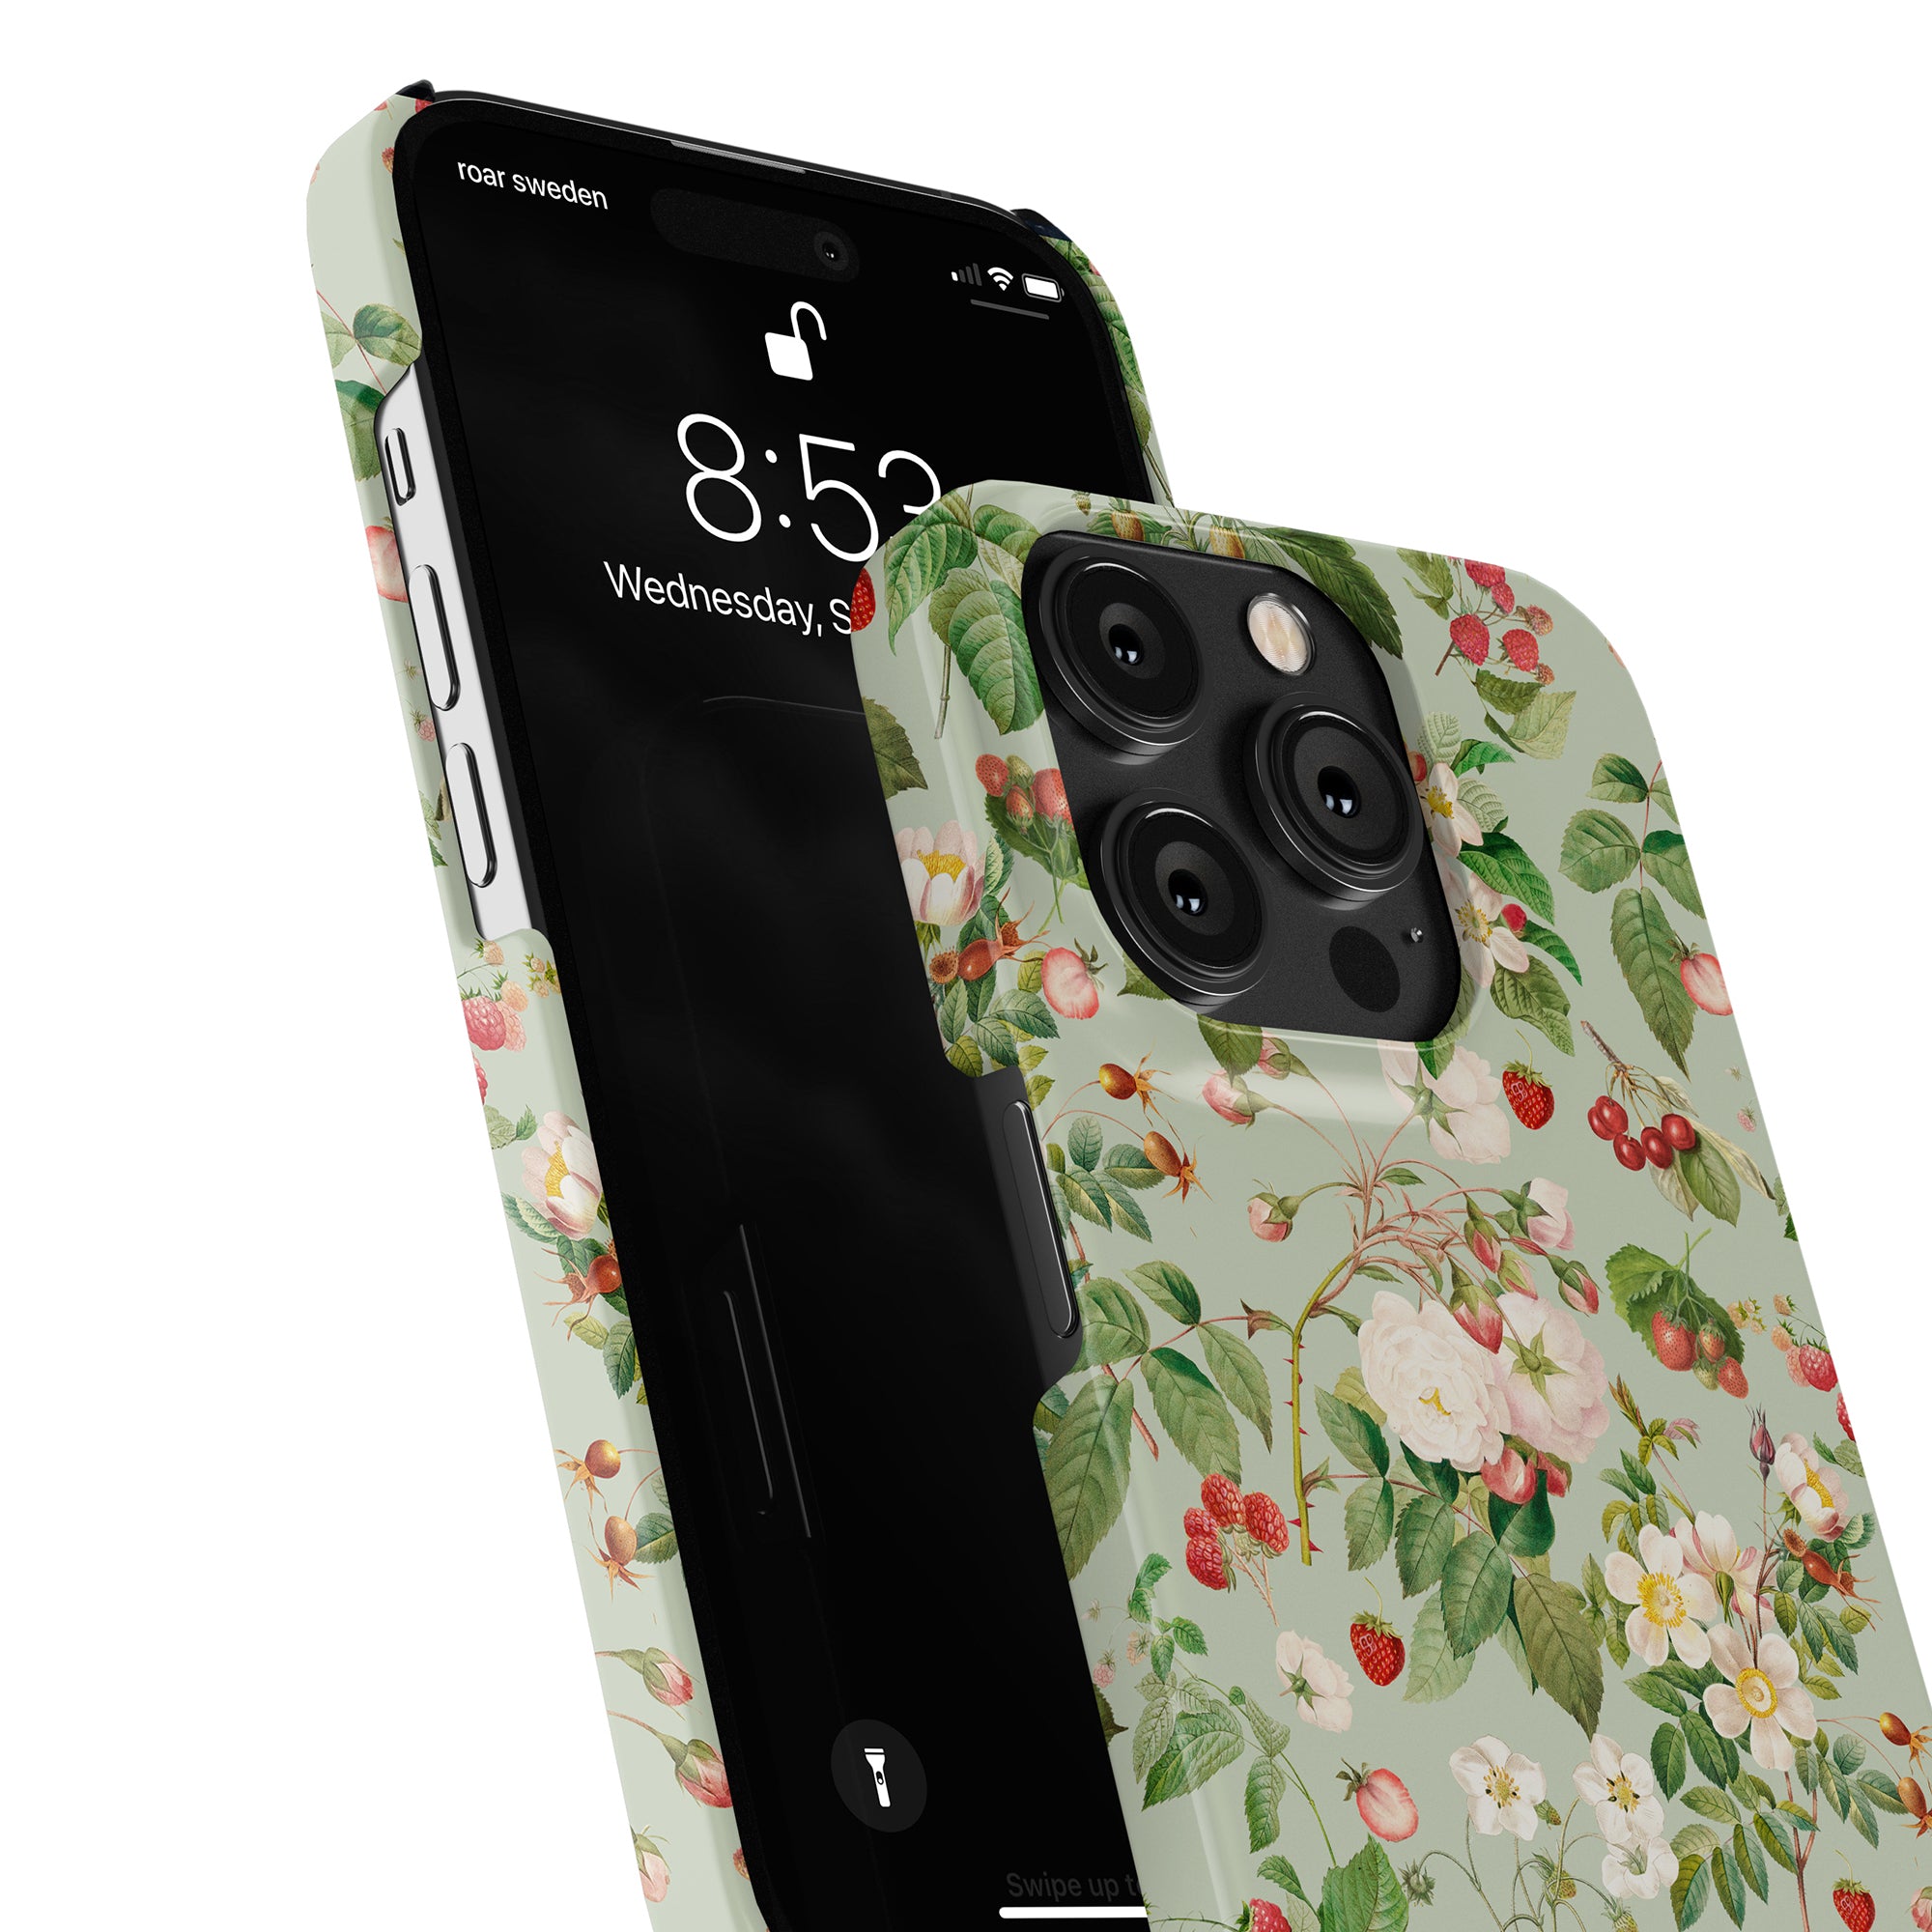 Two Tasty Garden - Slim cases with a floral pattern are showcased for SEO purposes in this detailed product description. One is facing front, displaying the lock screen, and the other is turned back, revealing the camera module.